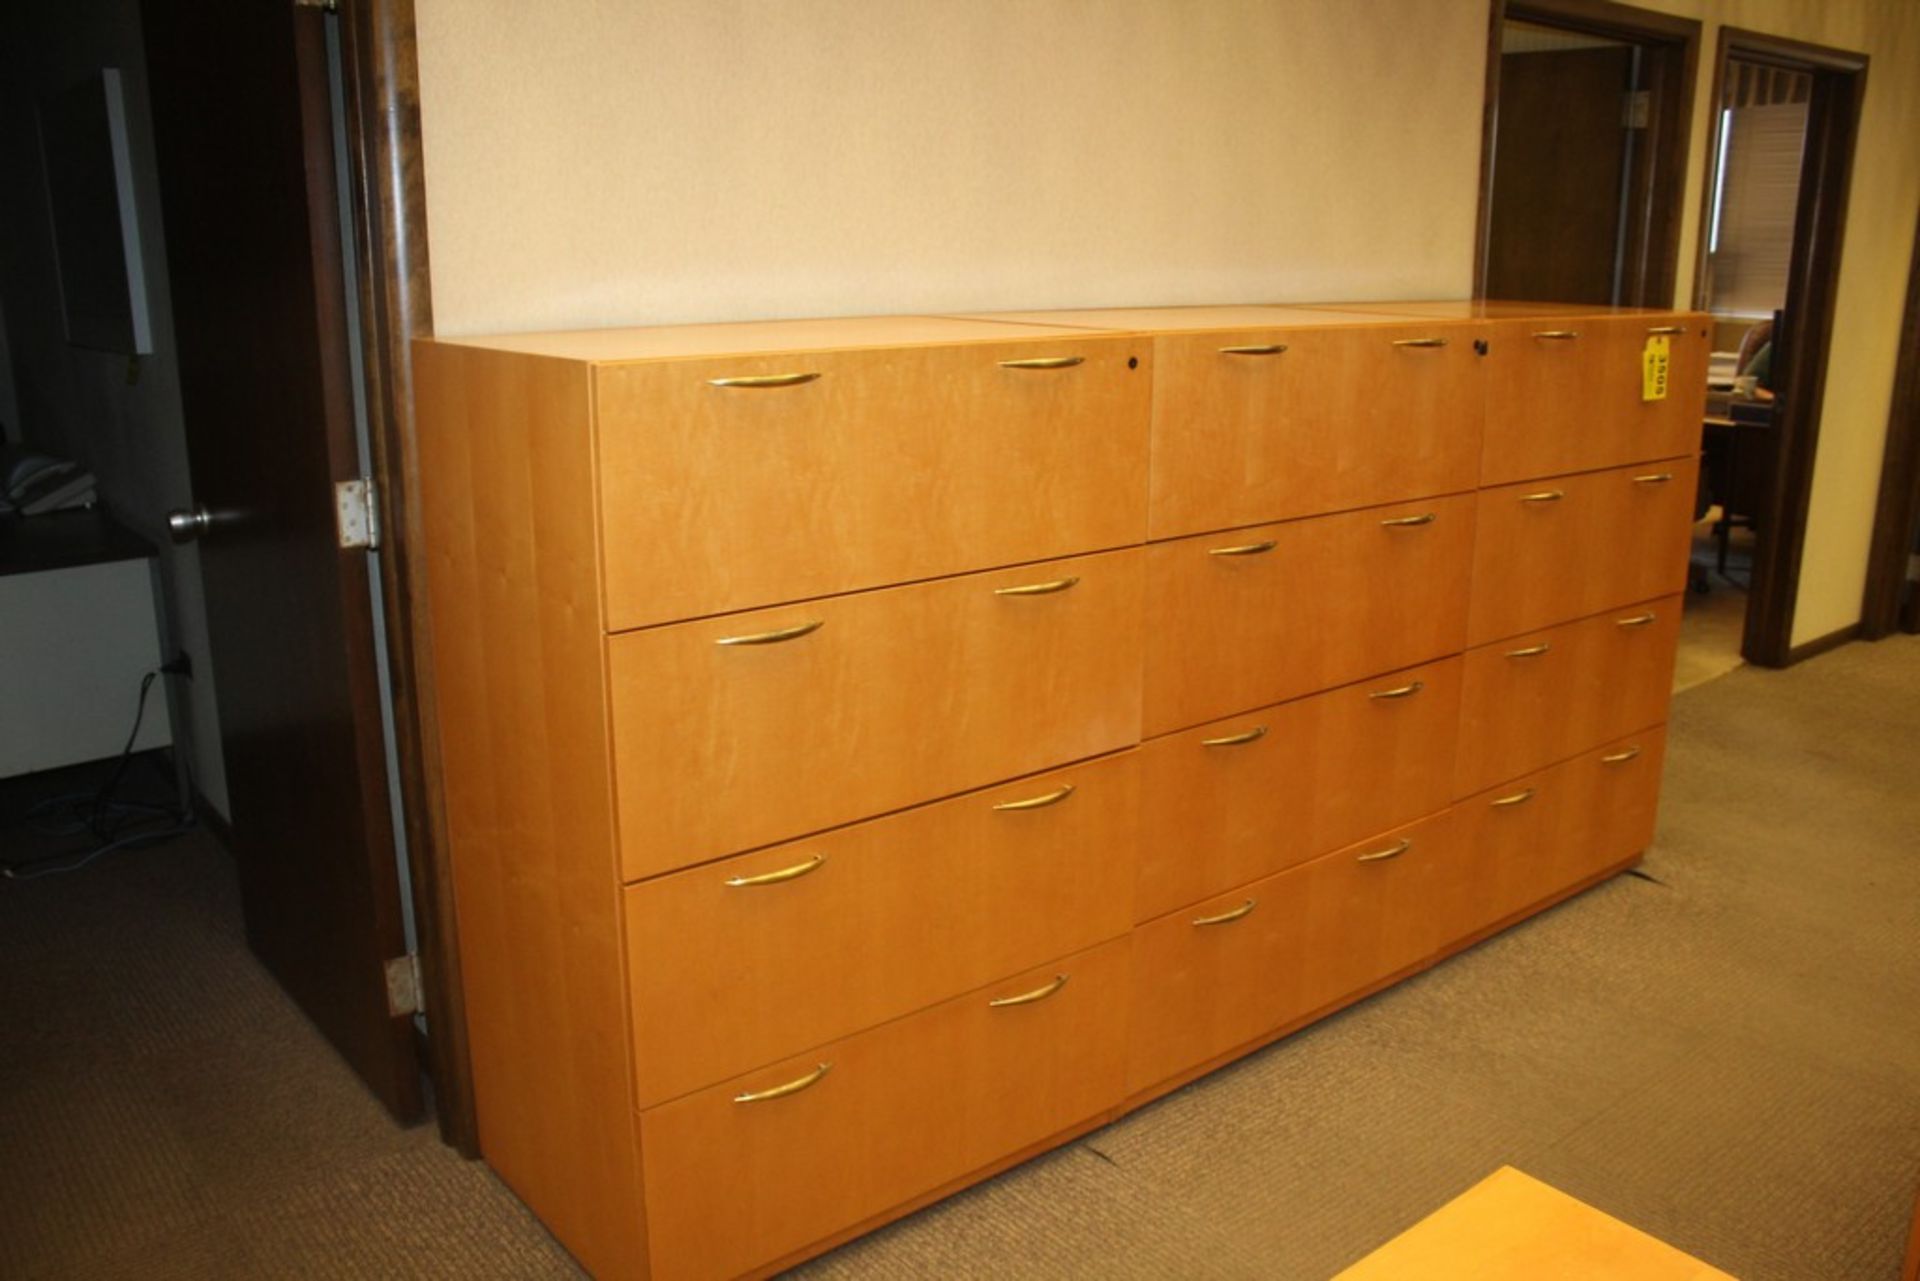 (3) FOUR DRAWER FILE CABINETS